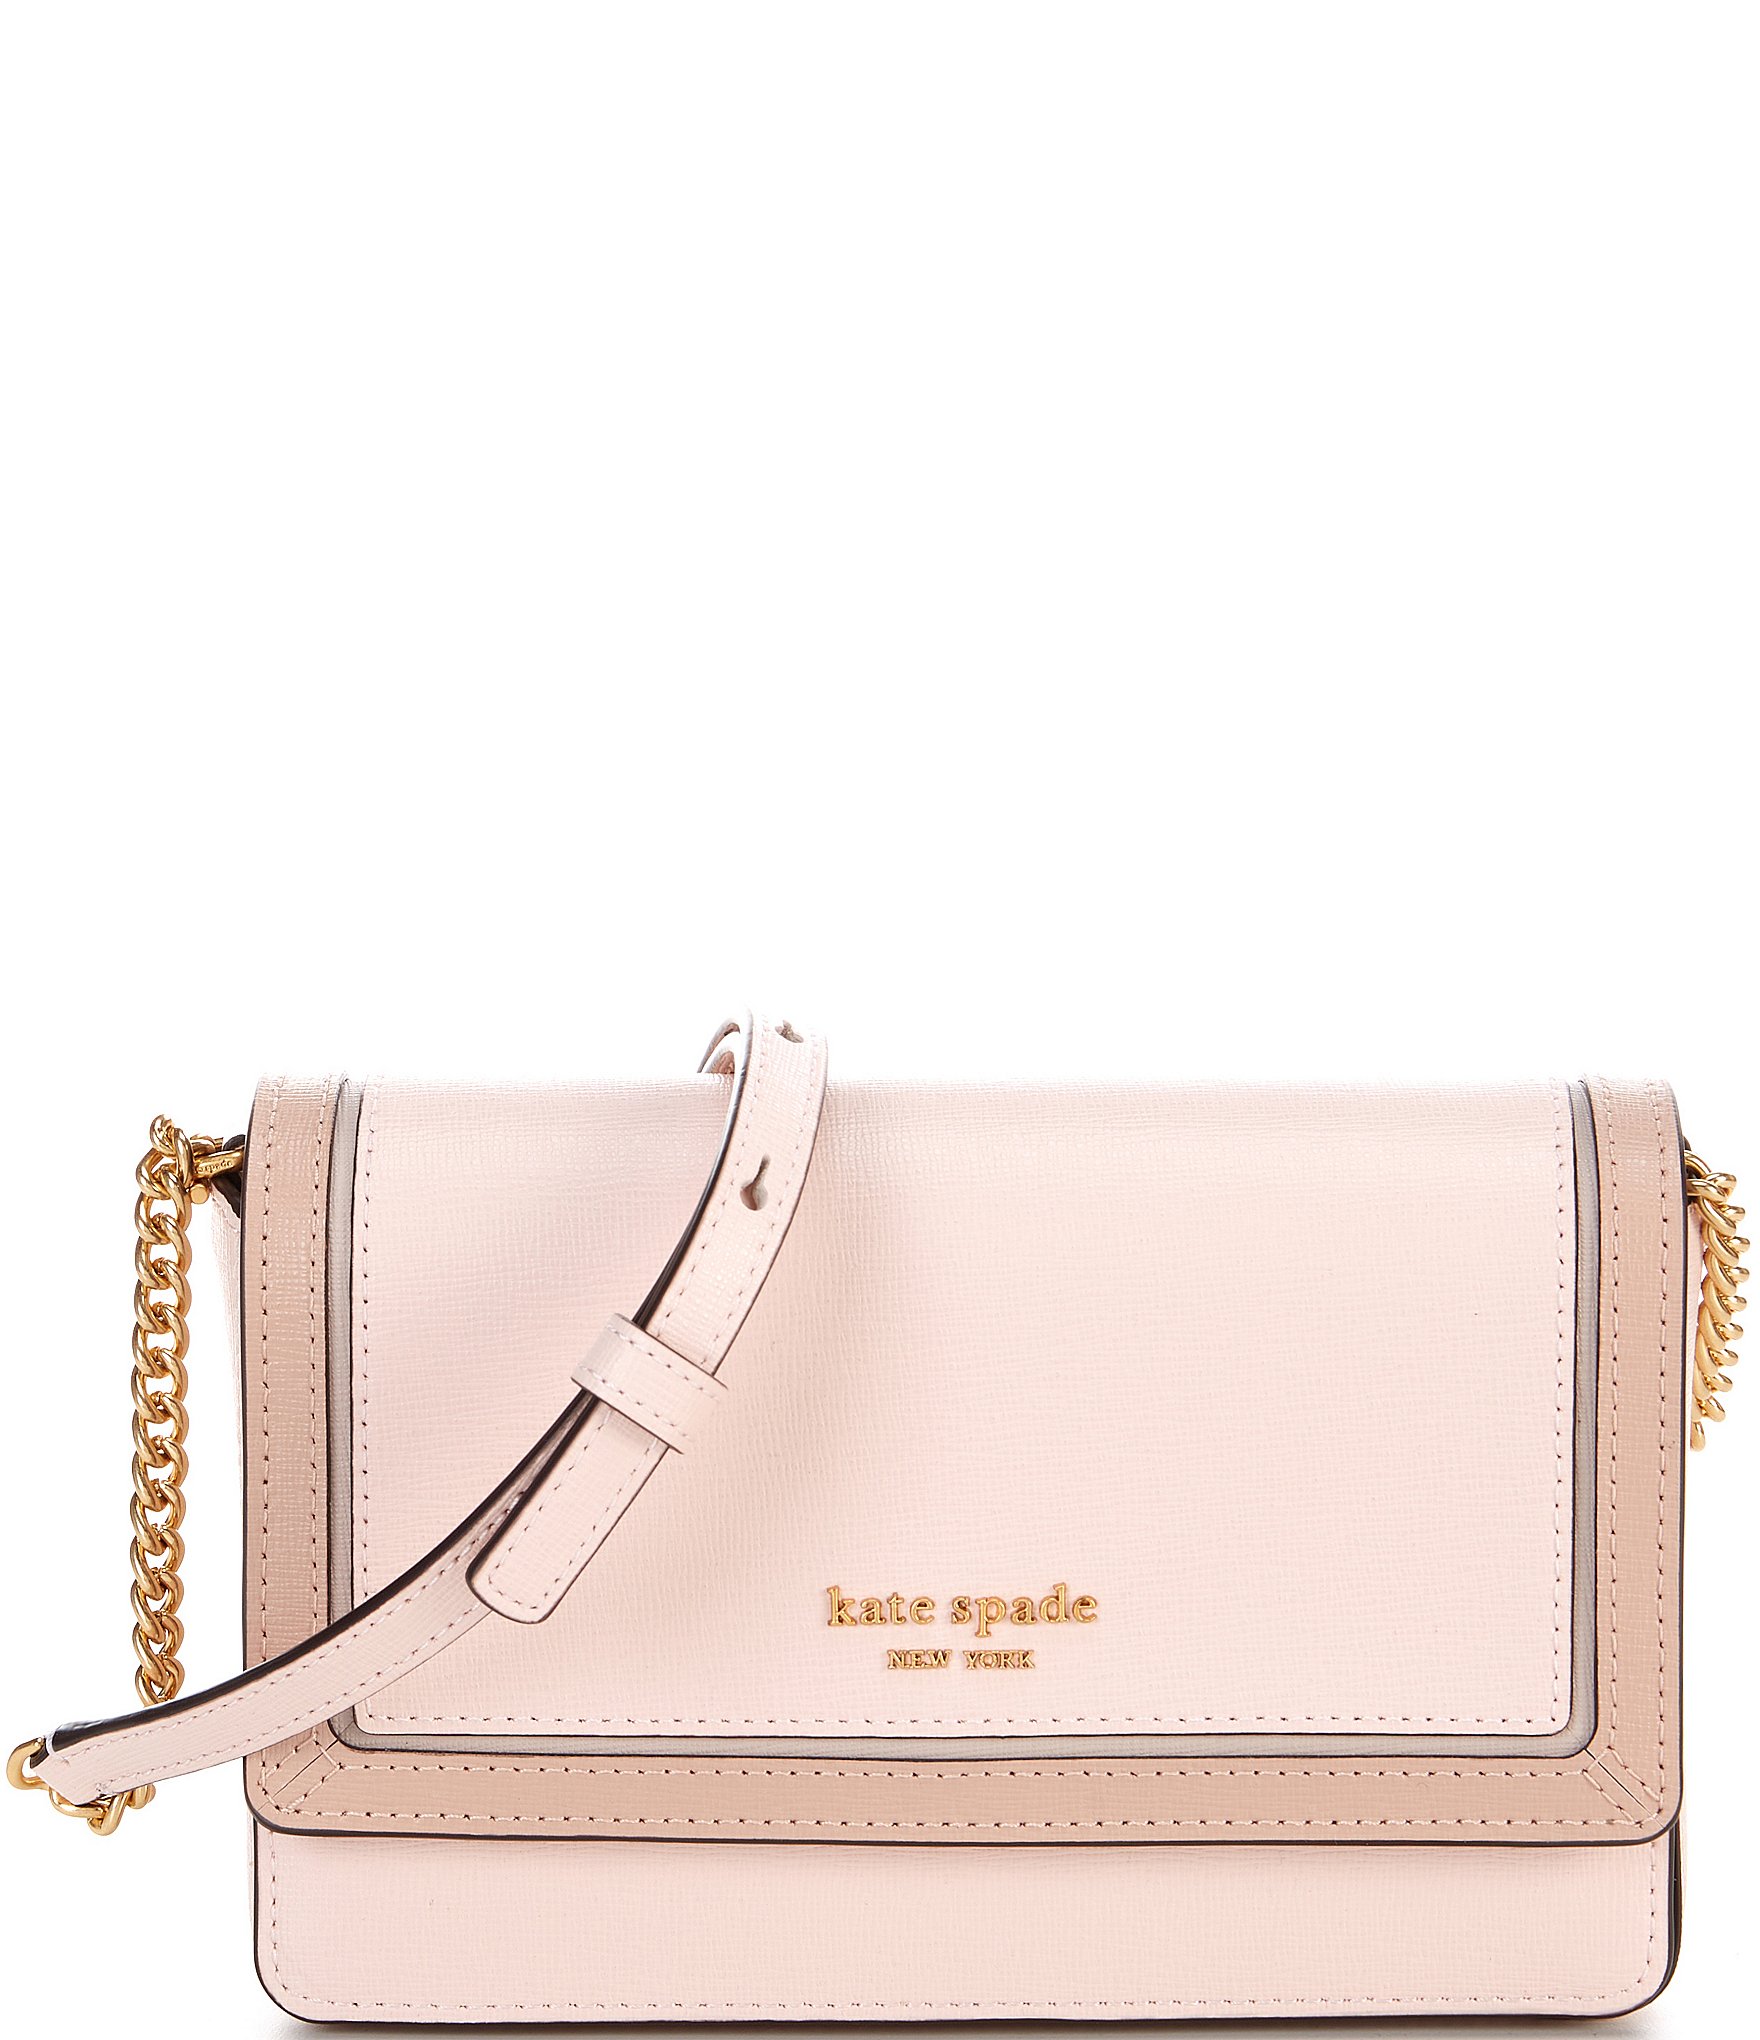 Kate Spade Crossbody Wallets Outlet UAE - LightSkyBlue Multicolor Morgan  Colorblocked Double Up Womens